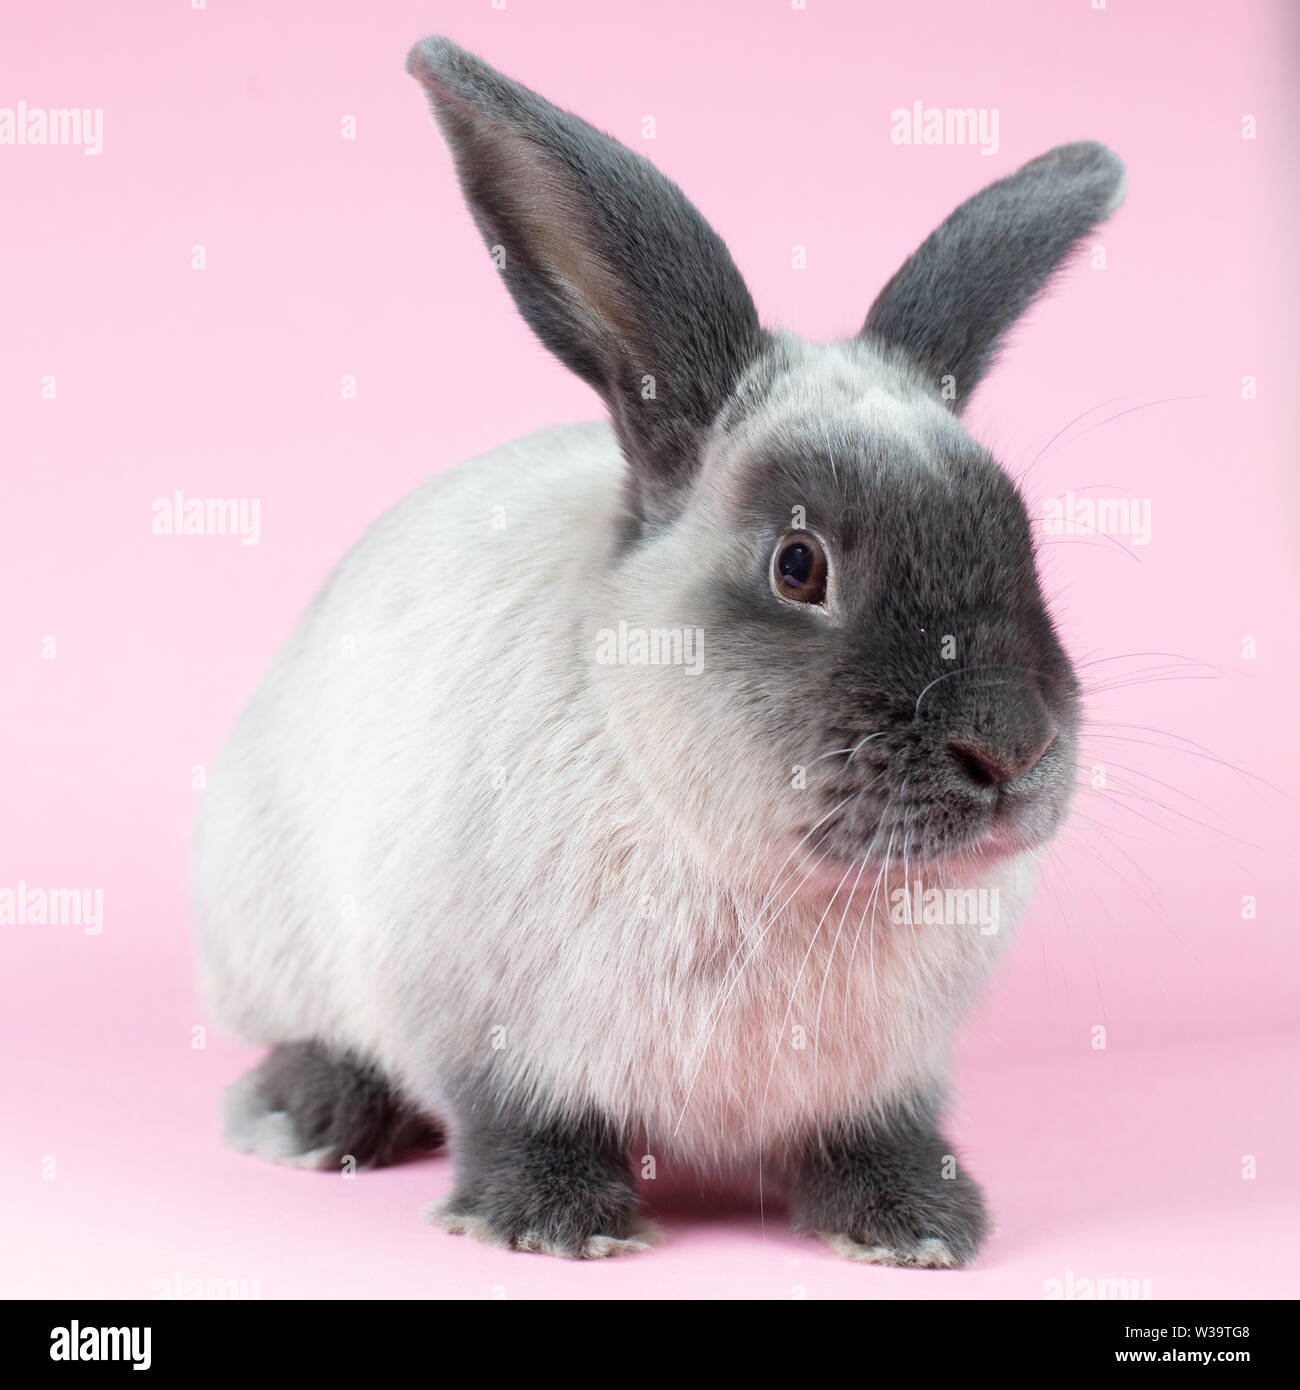 Lop Rabbit on Isolated Background Stock Photo